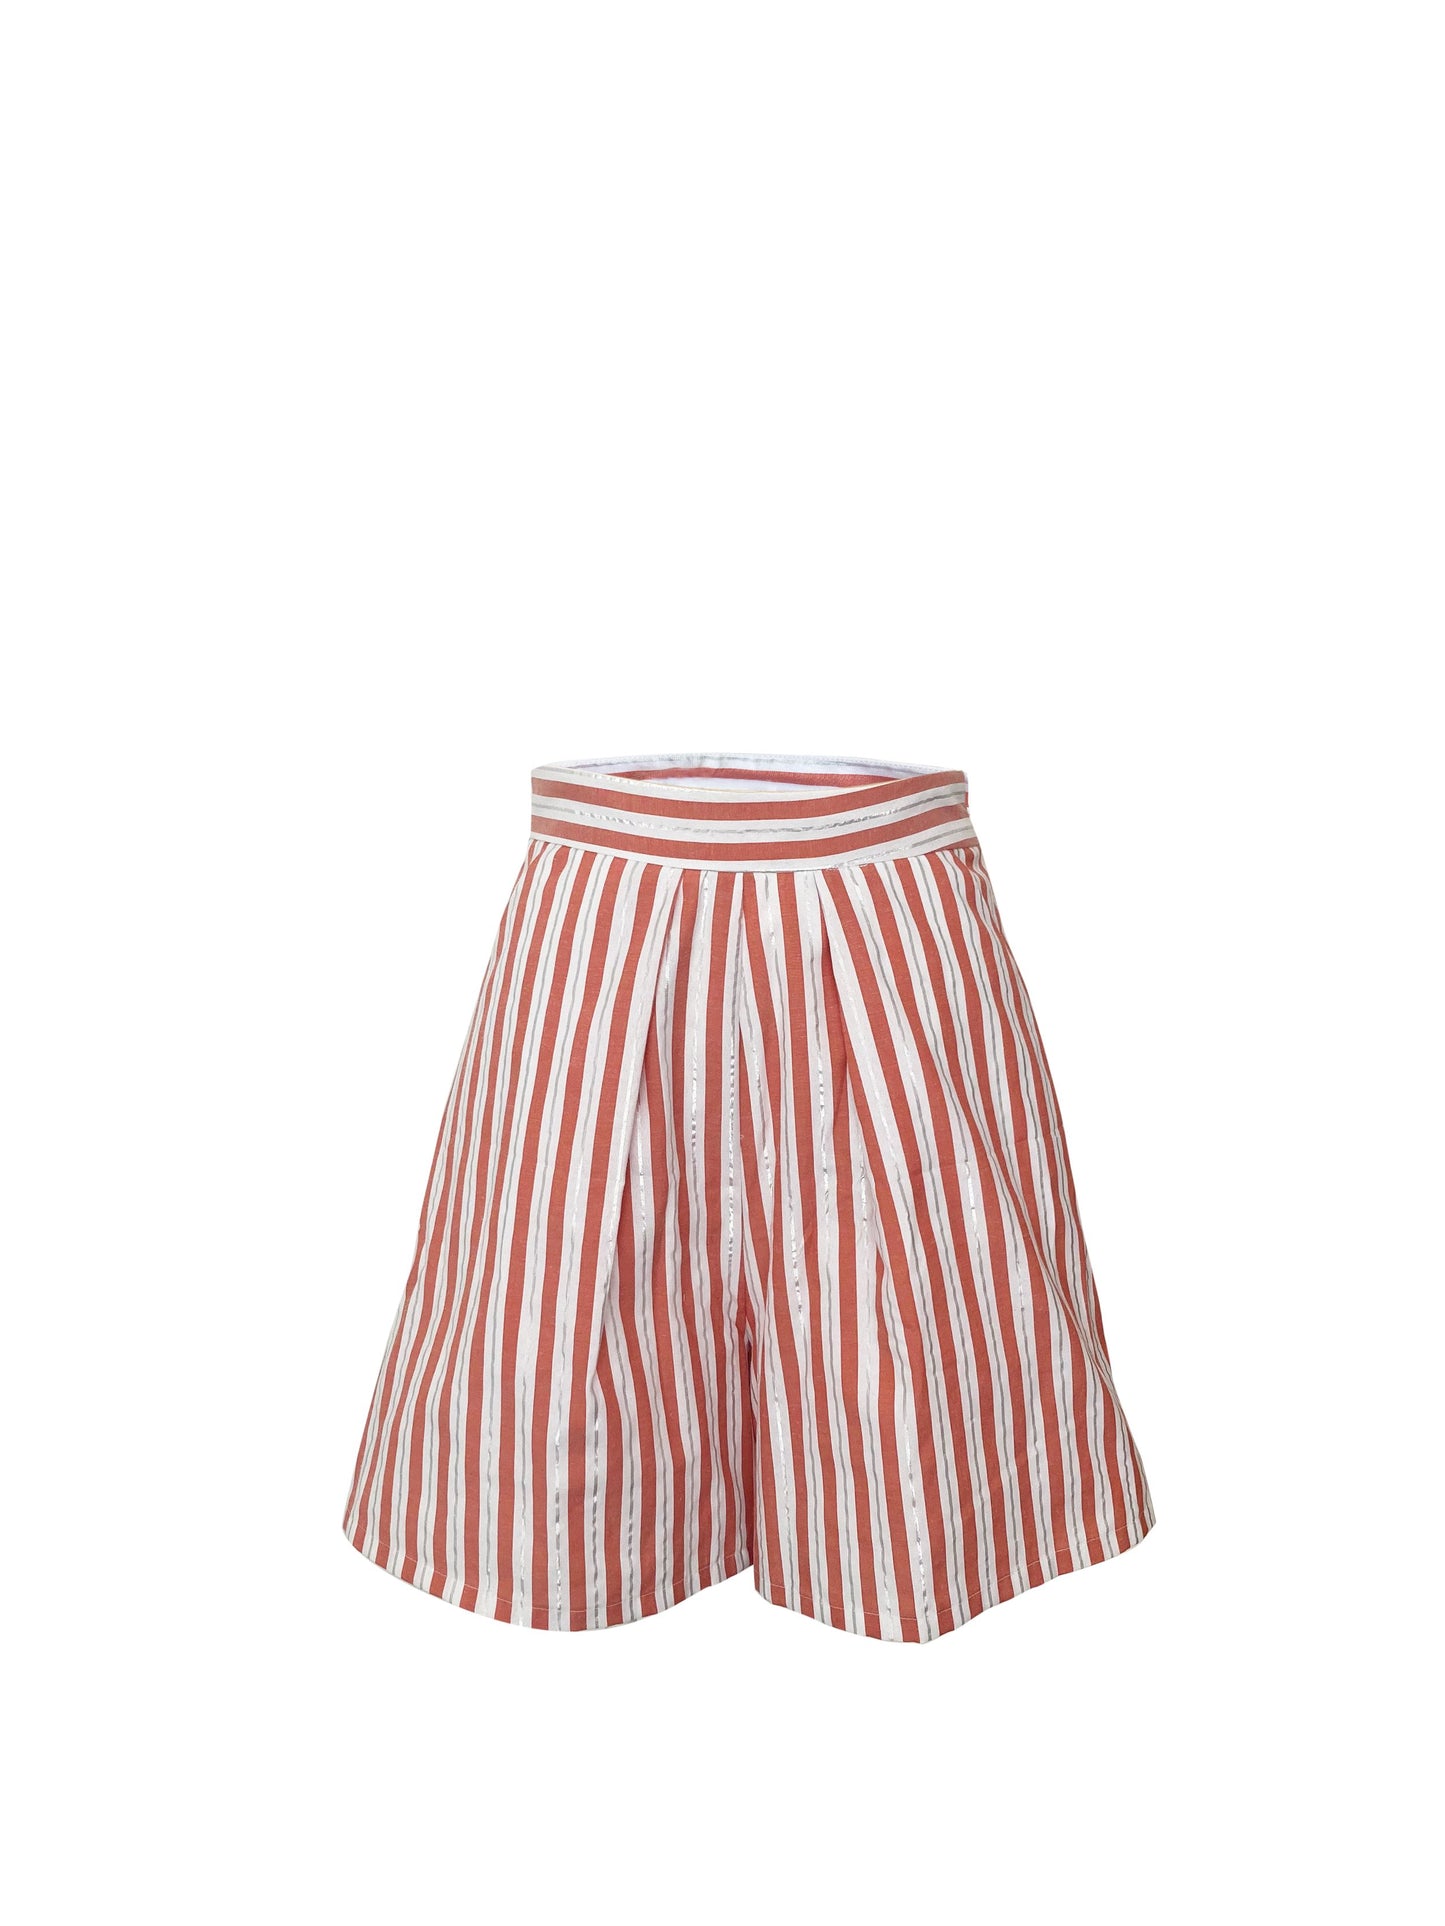 NANCY SHORTS - PINK STRIPED  LIMITED EDITION